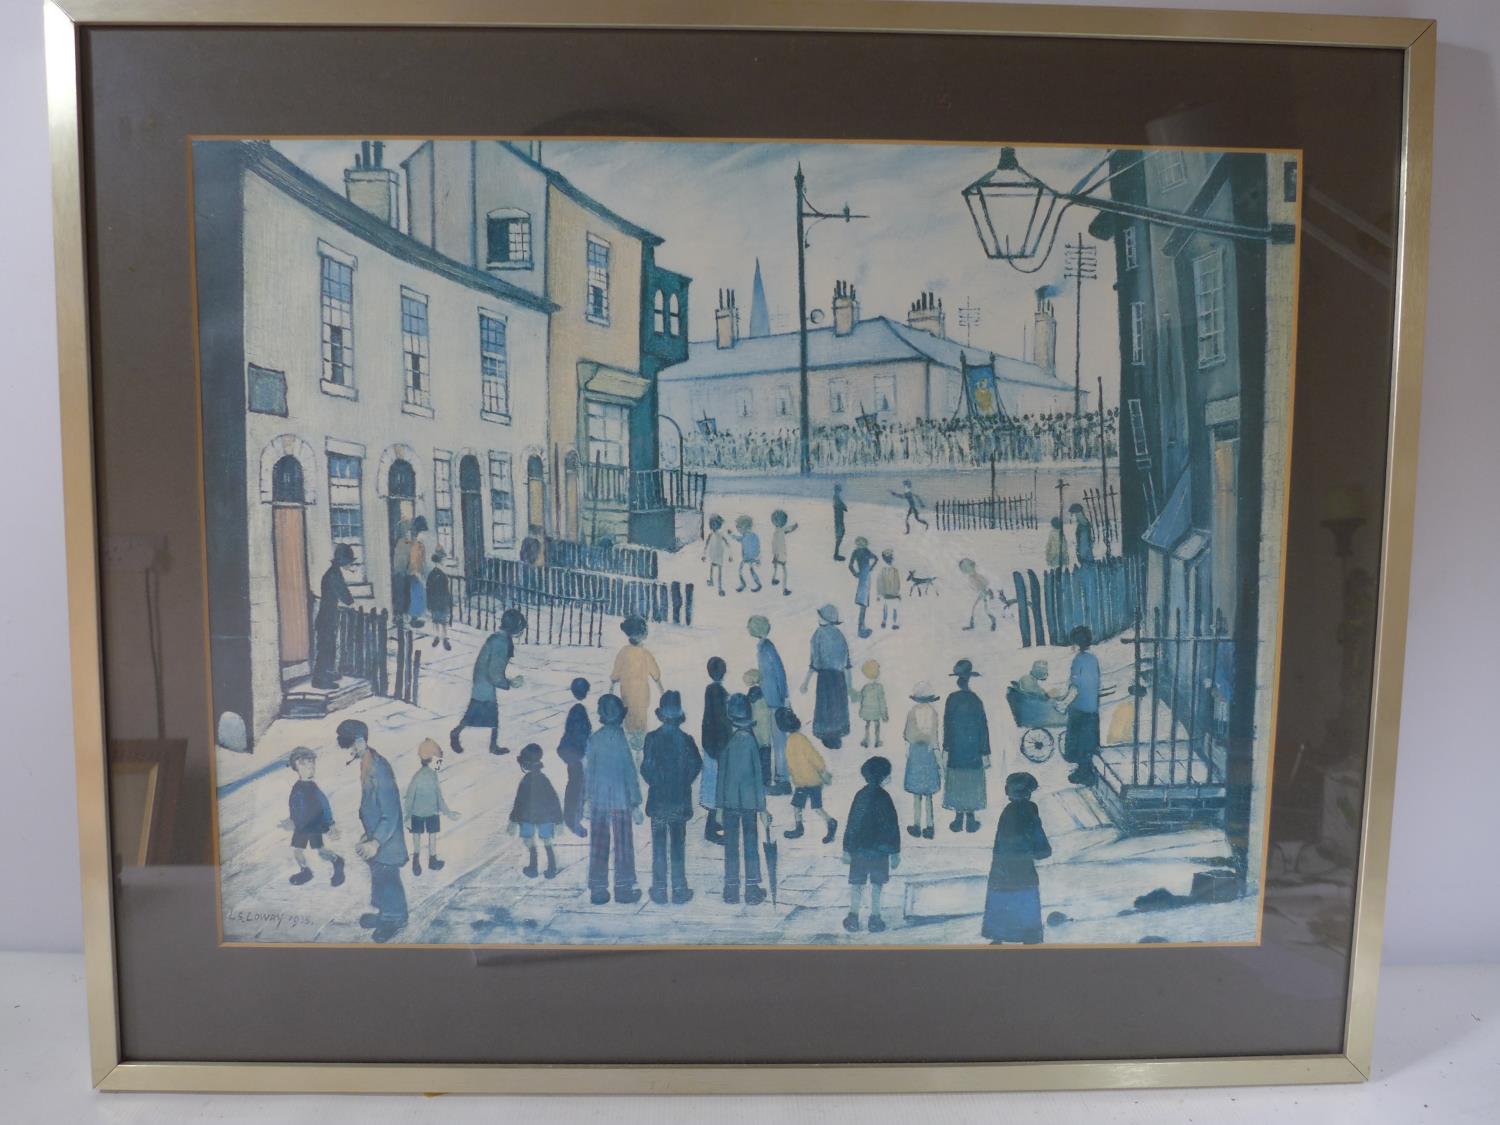 L.S.LOWRY, 'STREET PARADE', COLOURED PRINT, 45X60CM, FRAMED AND GLAZED